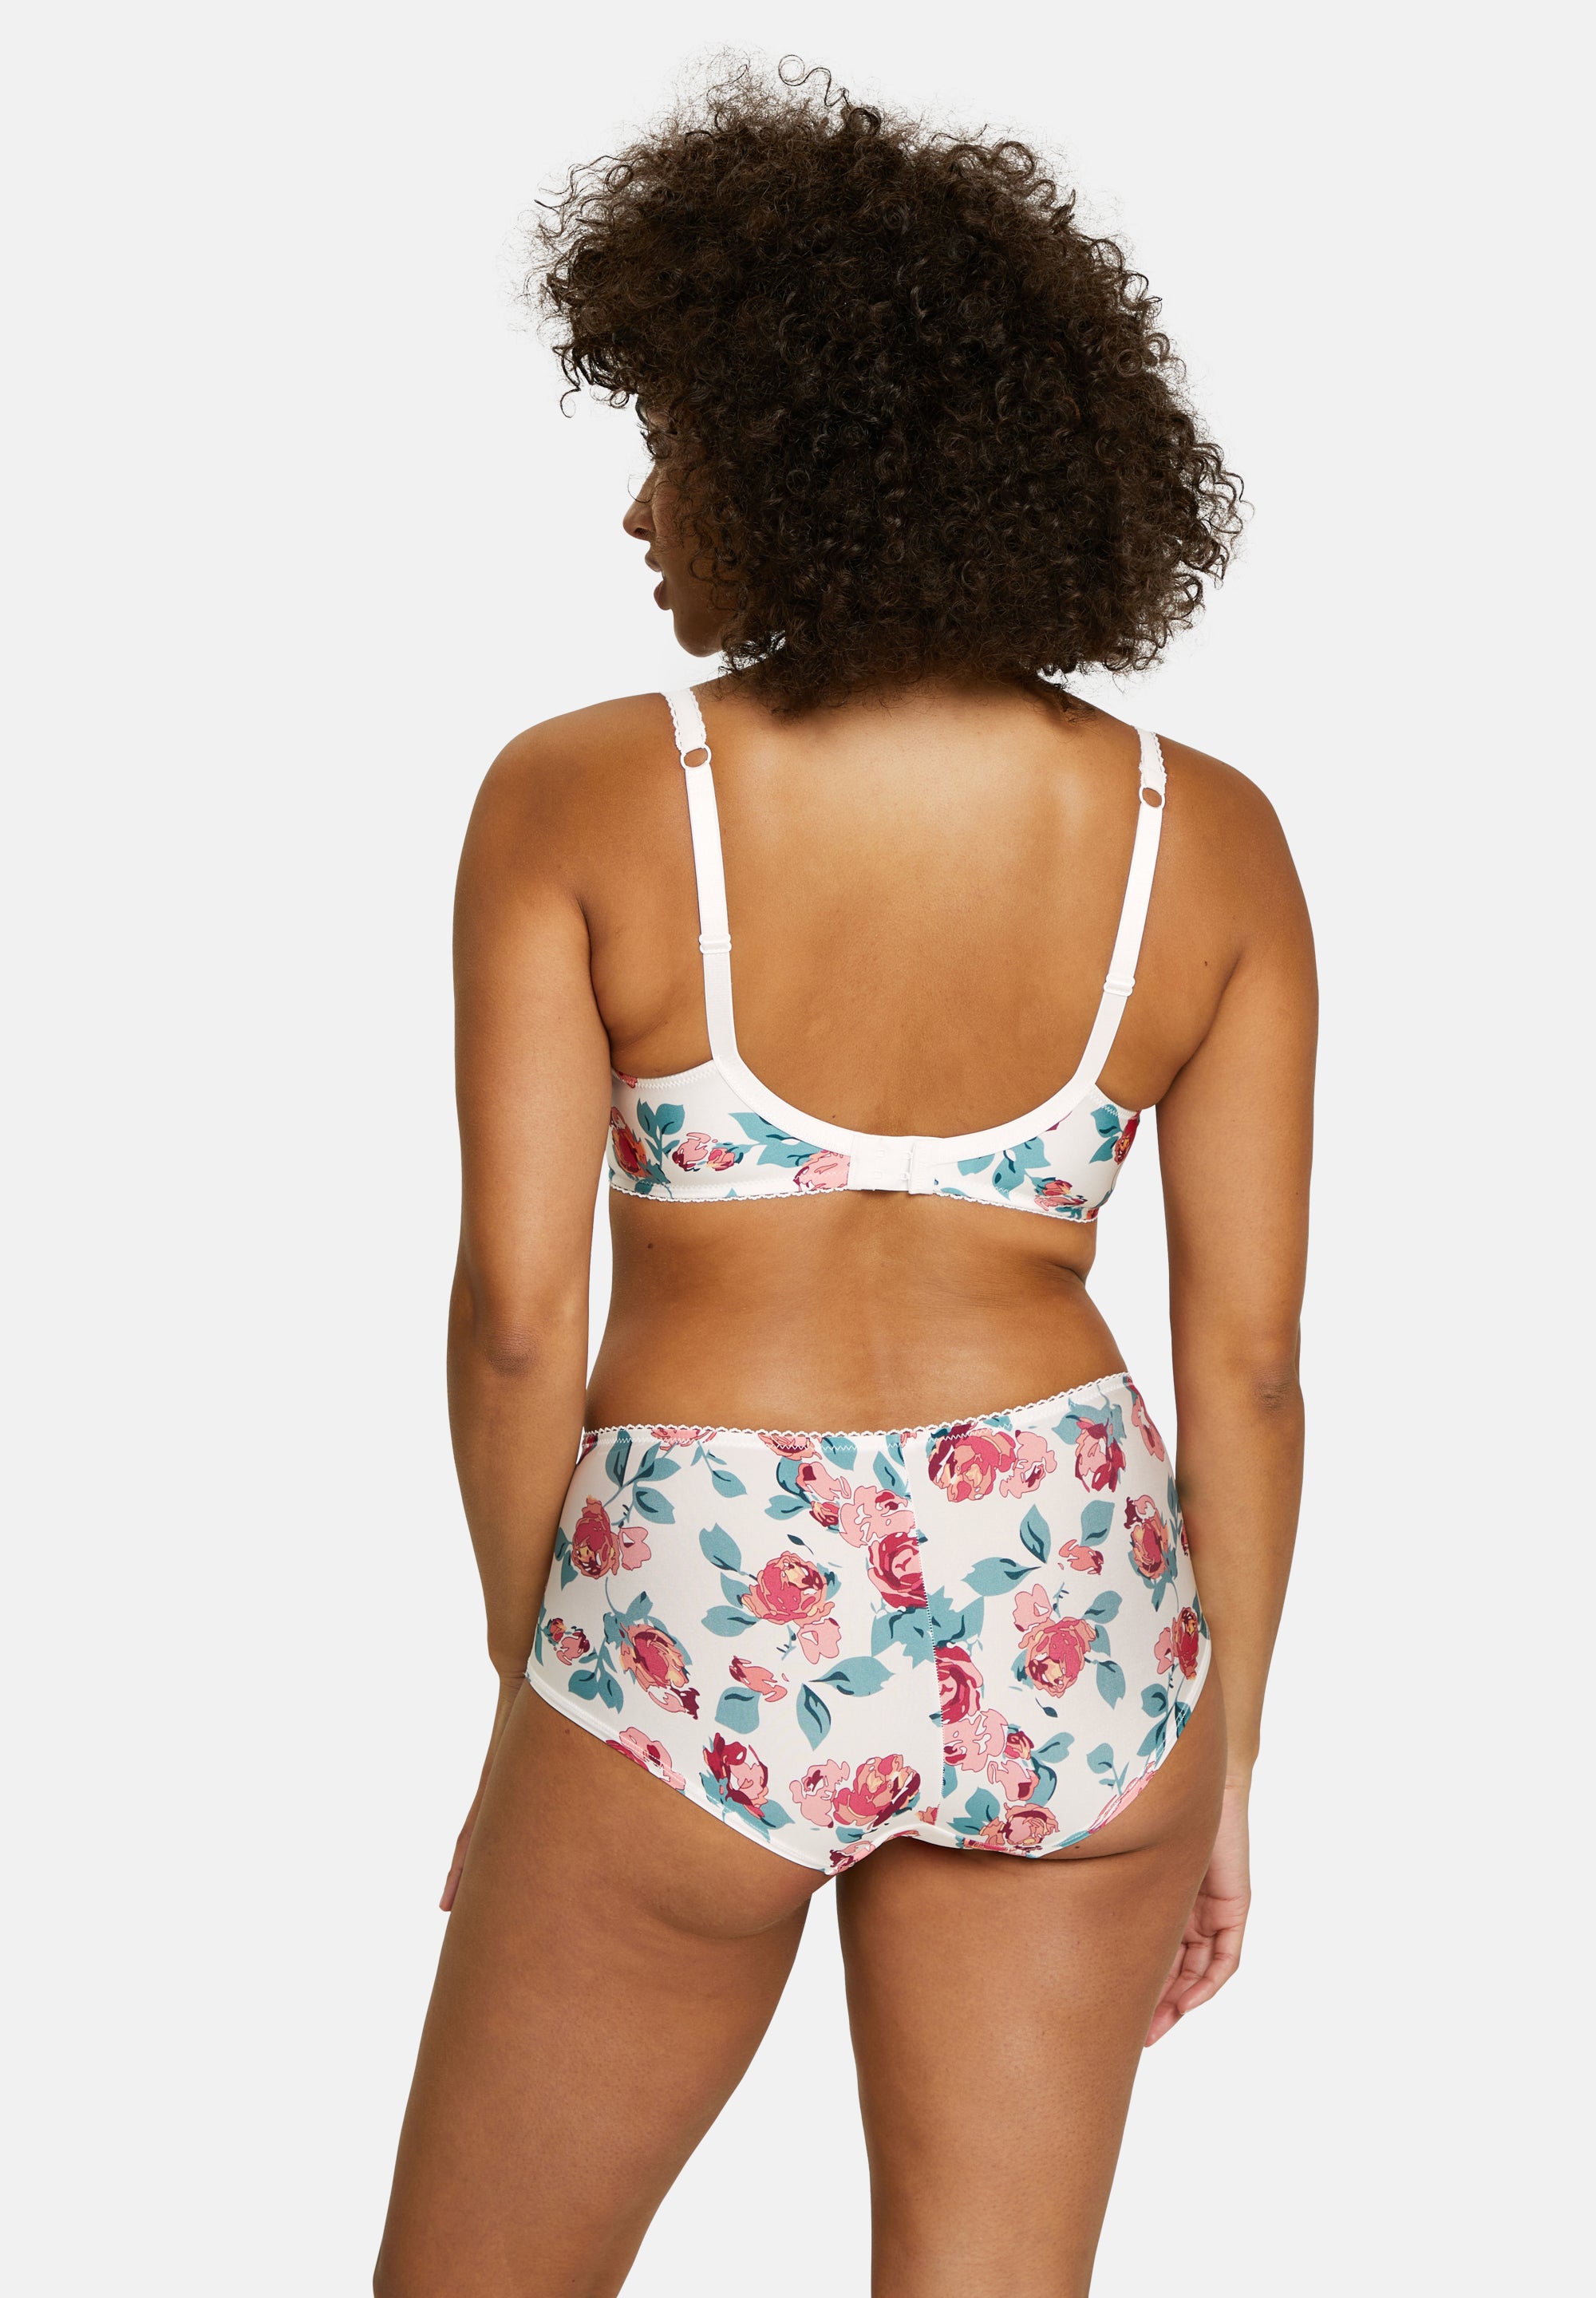 Tiffany Shorty Floral Print Pink & Ivory